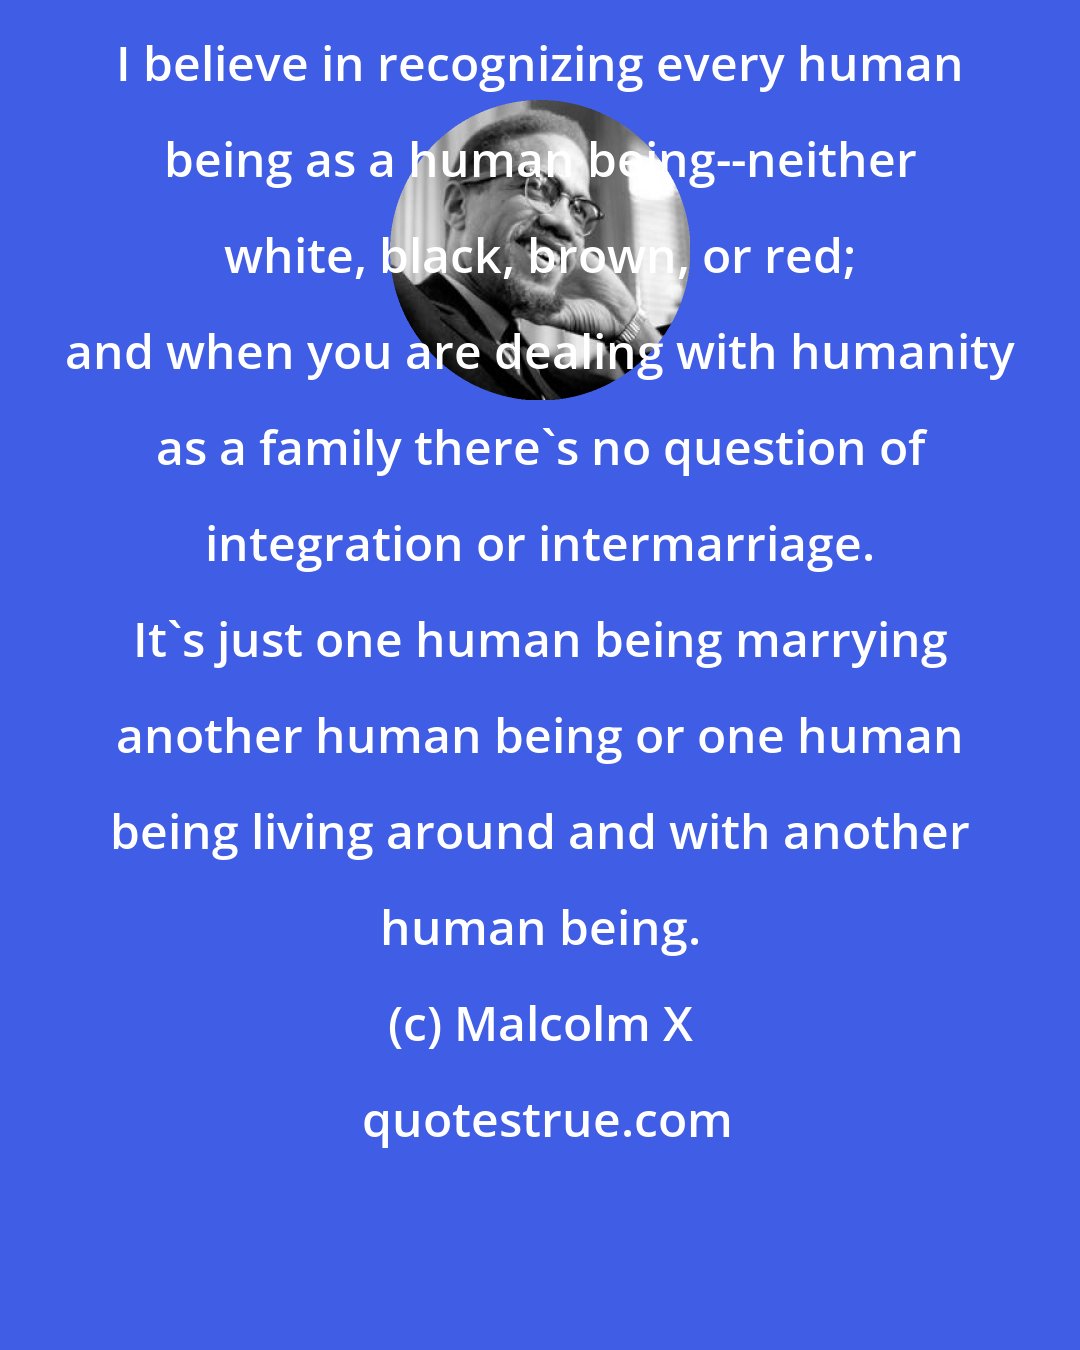 Malcolm X: I believe in recognizing every human being as a human being--neither white, black, brown, or red; and when you are dealing with humanity as a family there's no question of integration or intermarriage. It's just one human being marrying another human being or one human being living around and with another human being.